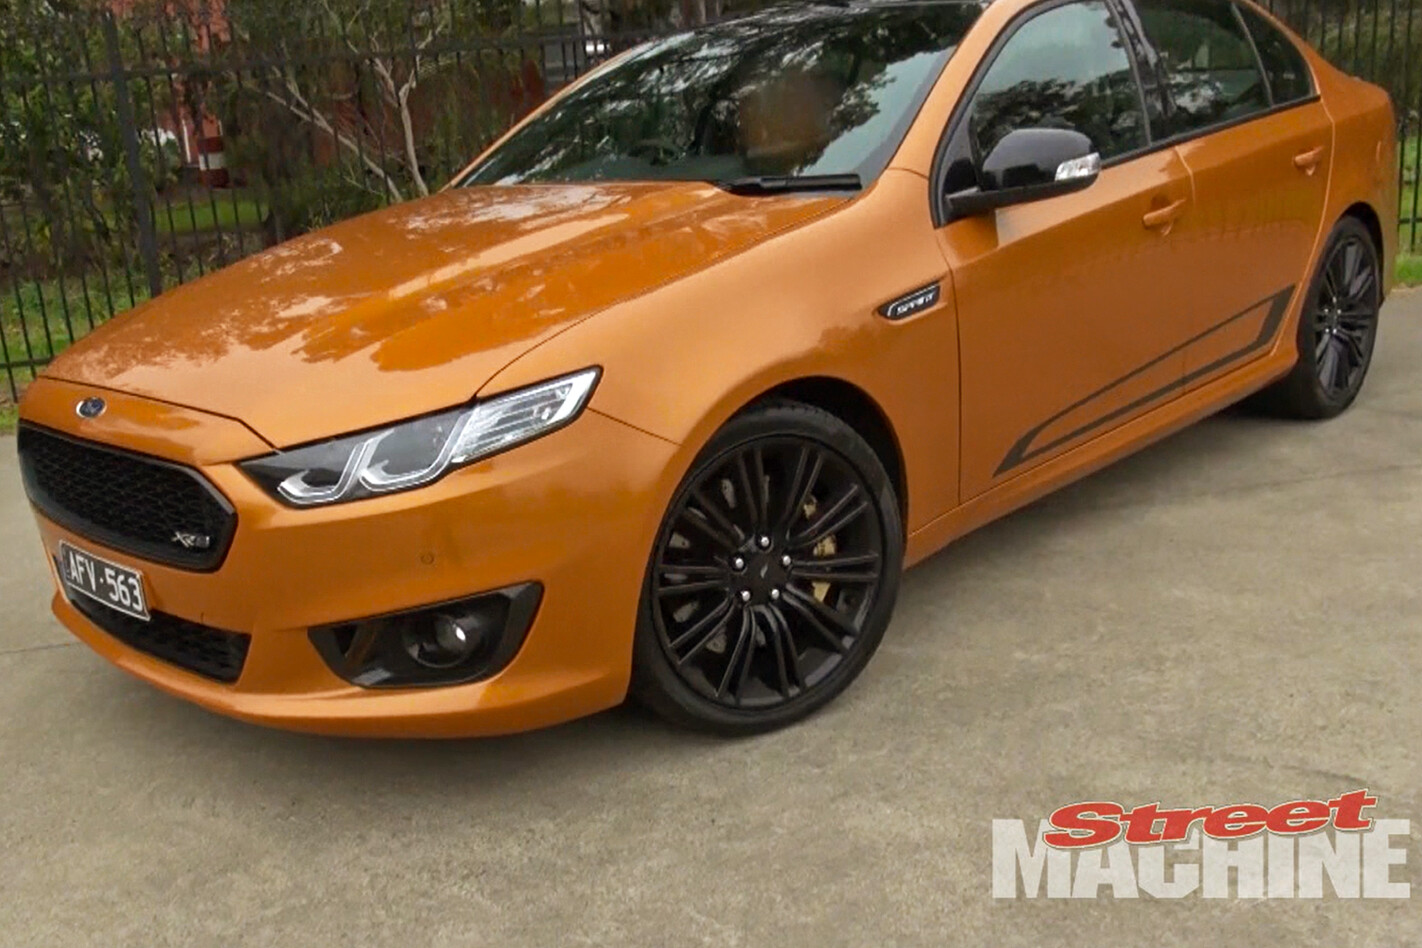 Falcon XR8 Sprint front